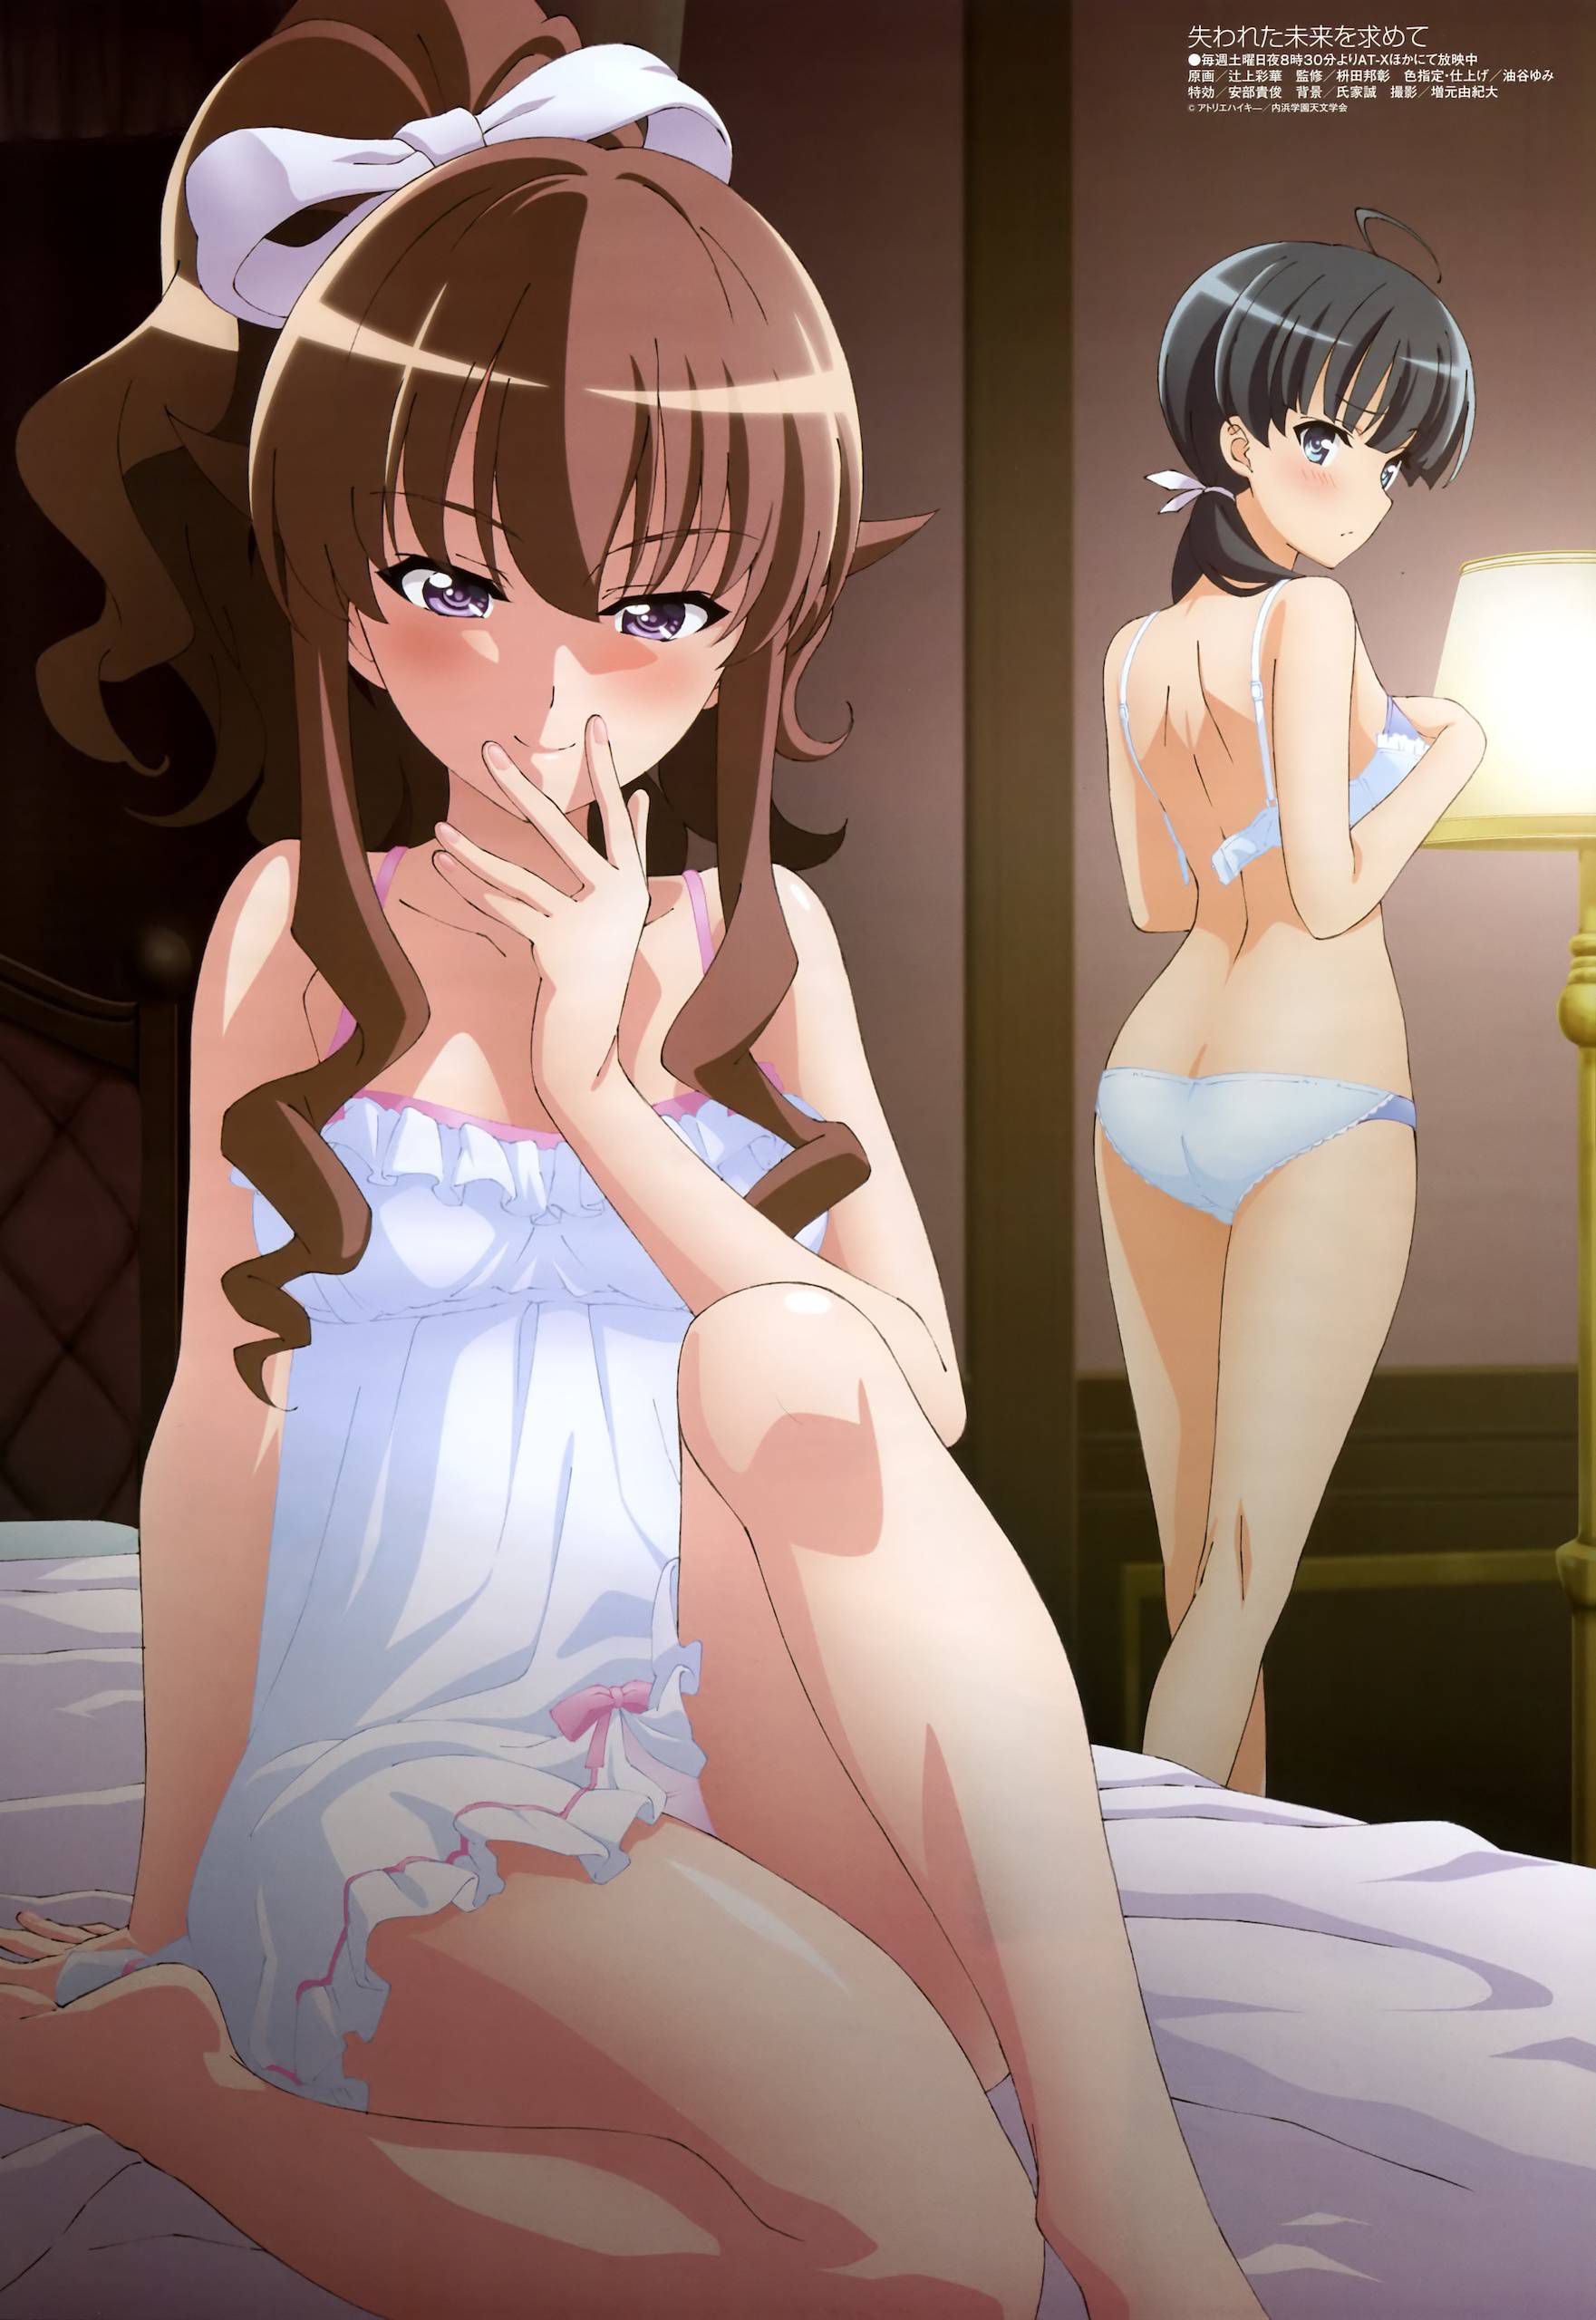 Naughty secondary image of a defenseless girl in underwear wwww 34